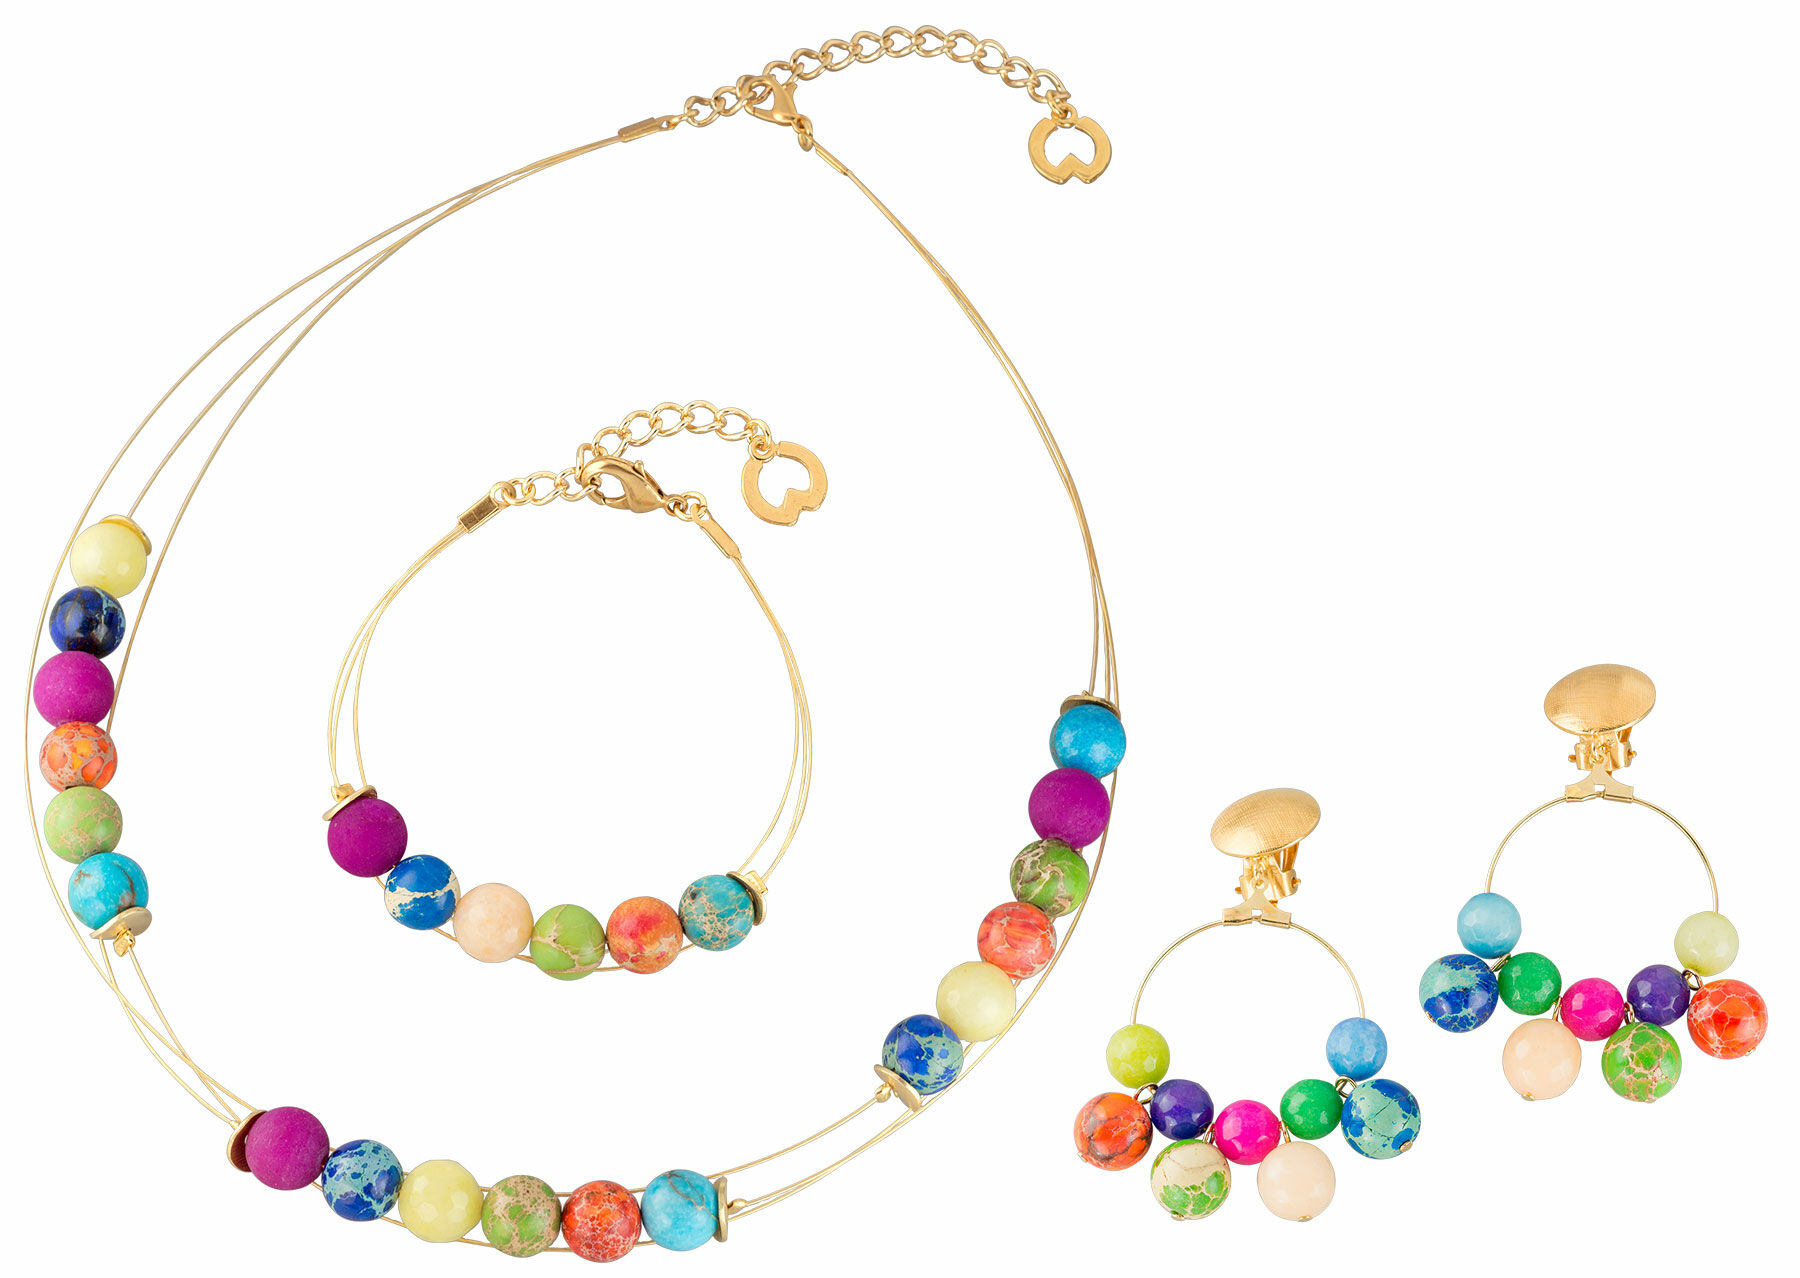 Jewellery set "Summer" with pearls by Petra Waszak